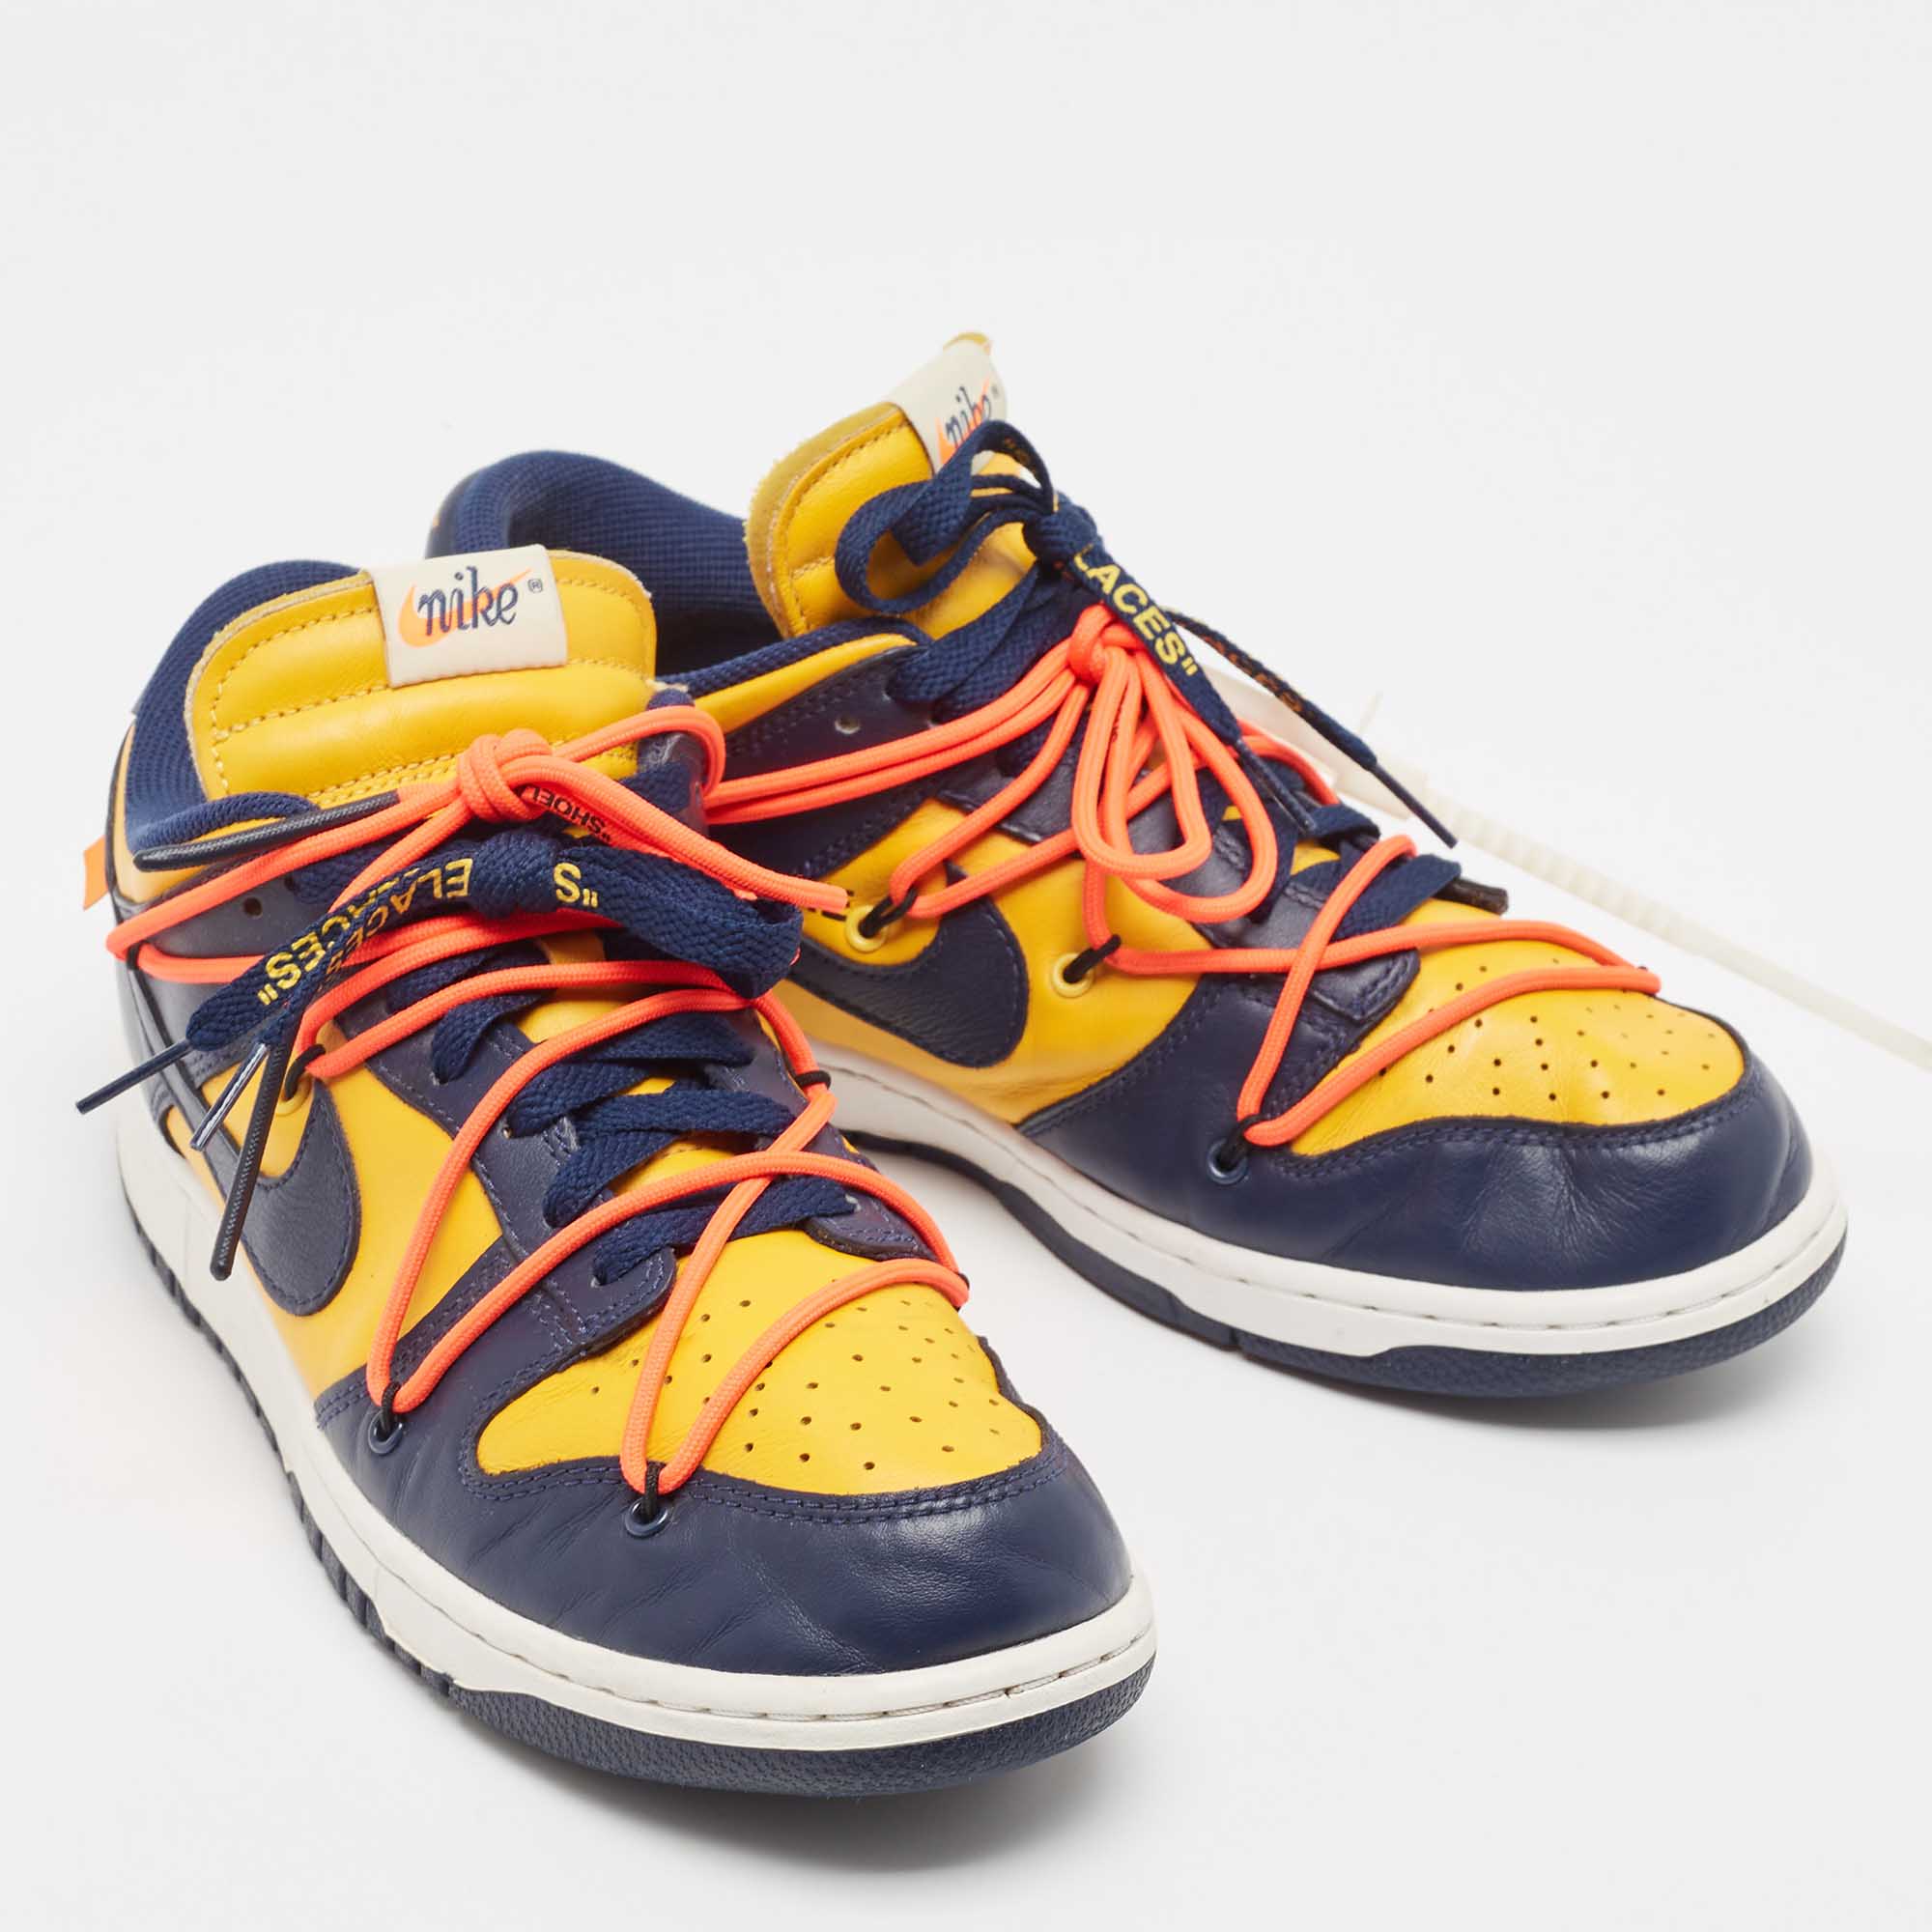 Off-White X Nike Yellow/Navy Blue Leather Michigan Sneakers Size 42.5